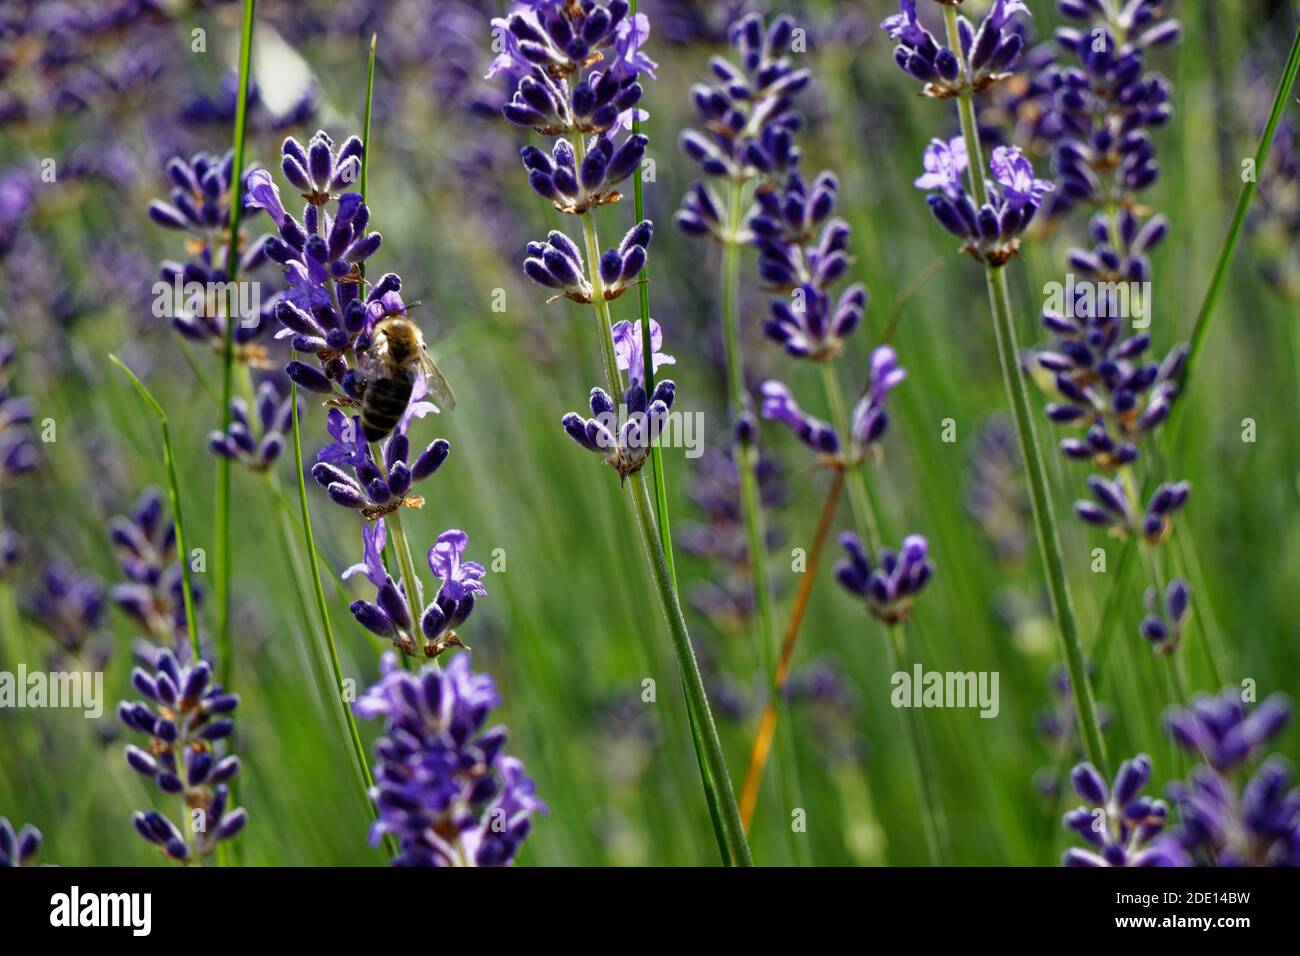 Closeup view of a lavender bush and bee collecting nectar Stock Photo